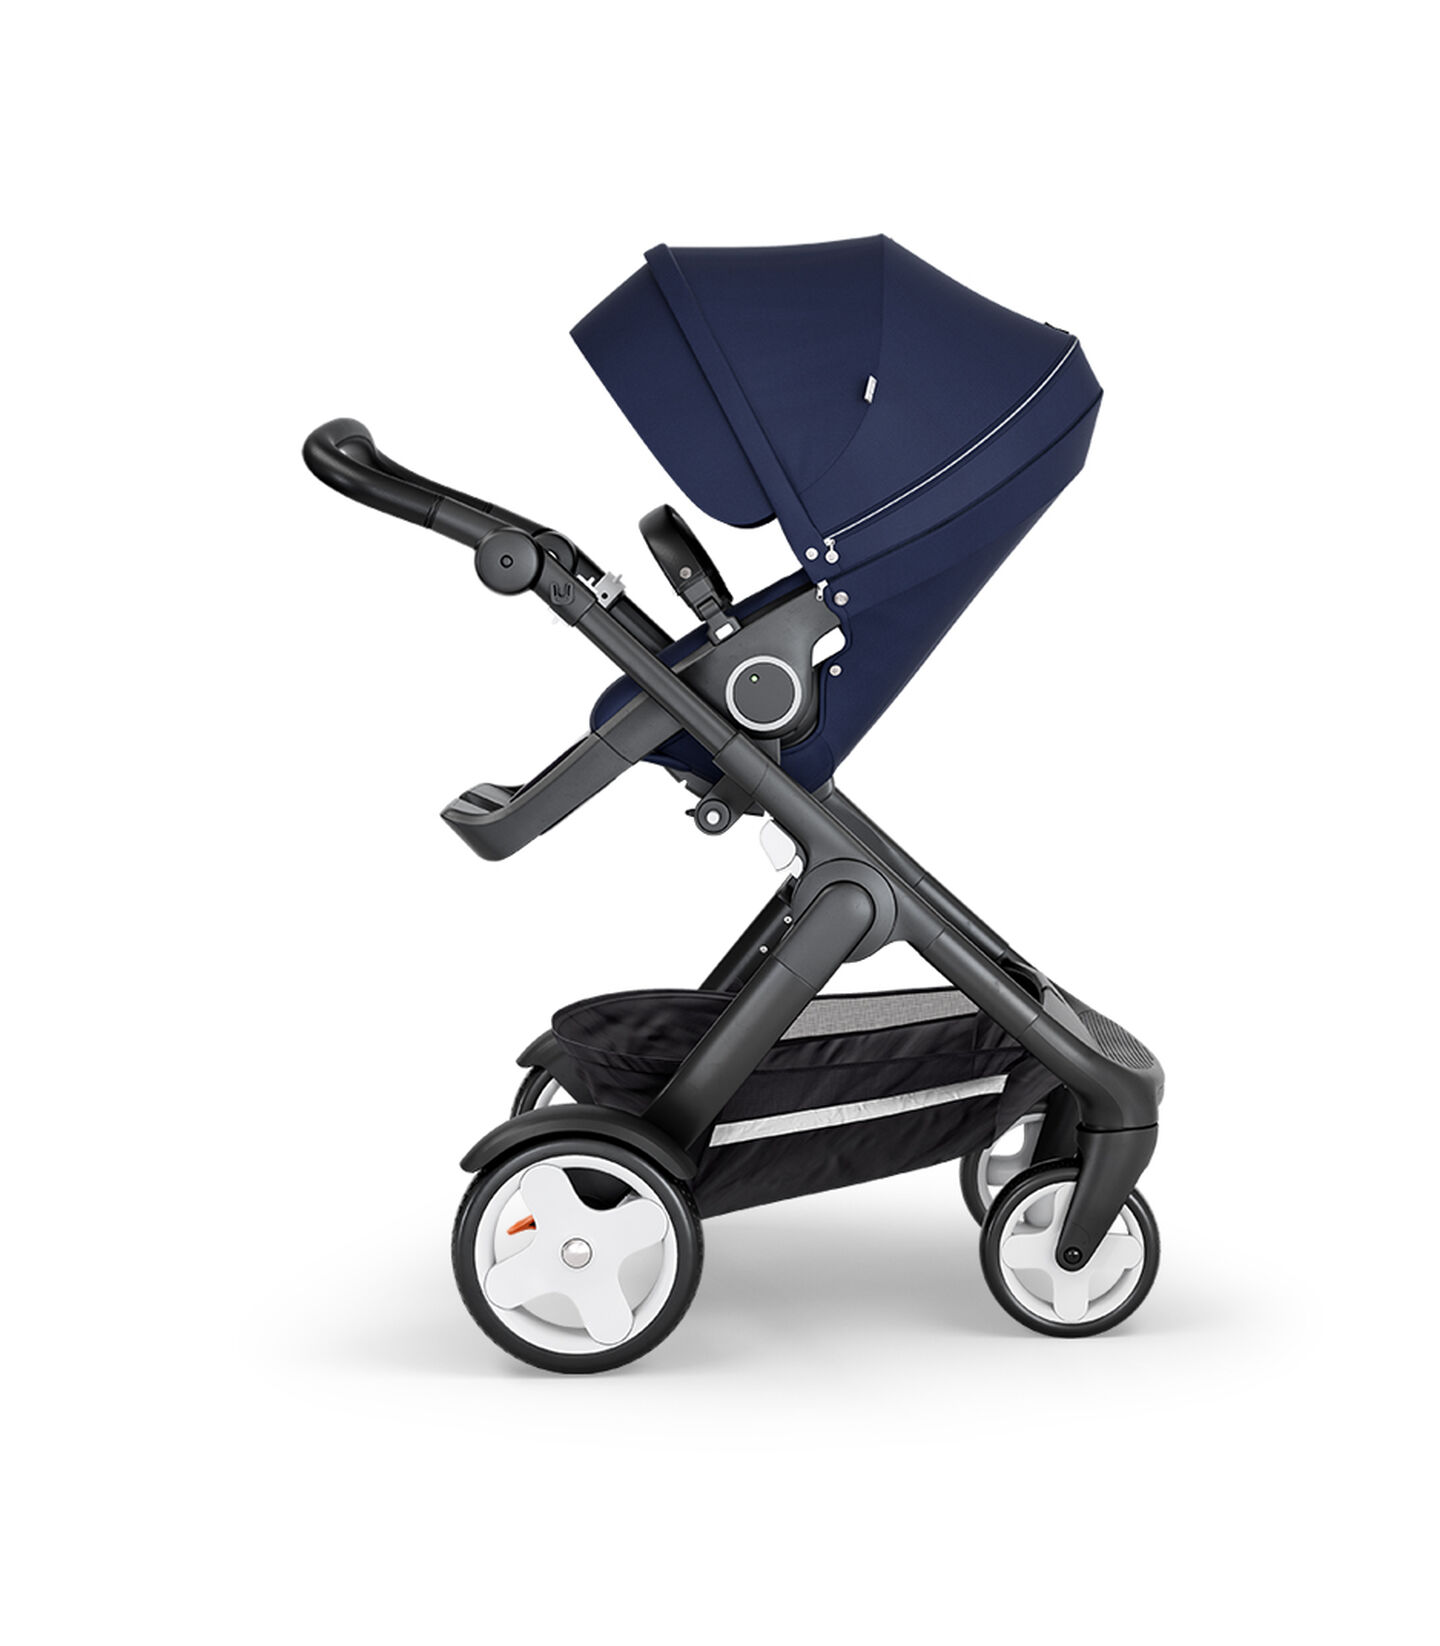 Stokke® Trailz™ with Black Chassis, Black Leatherette and Classic Wheels. Stokke® Stroller Seat, Deep Blue. view 1